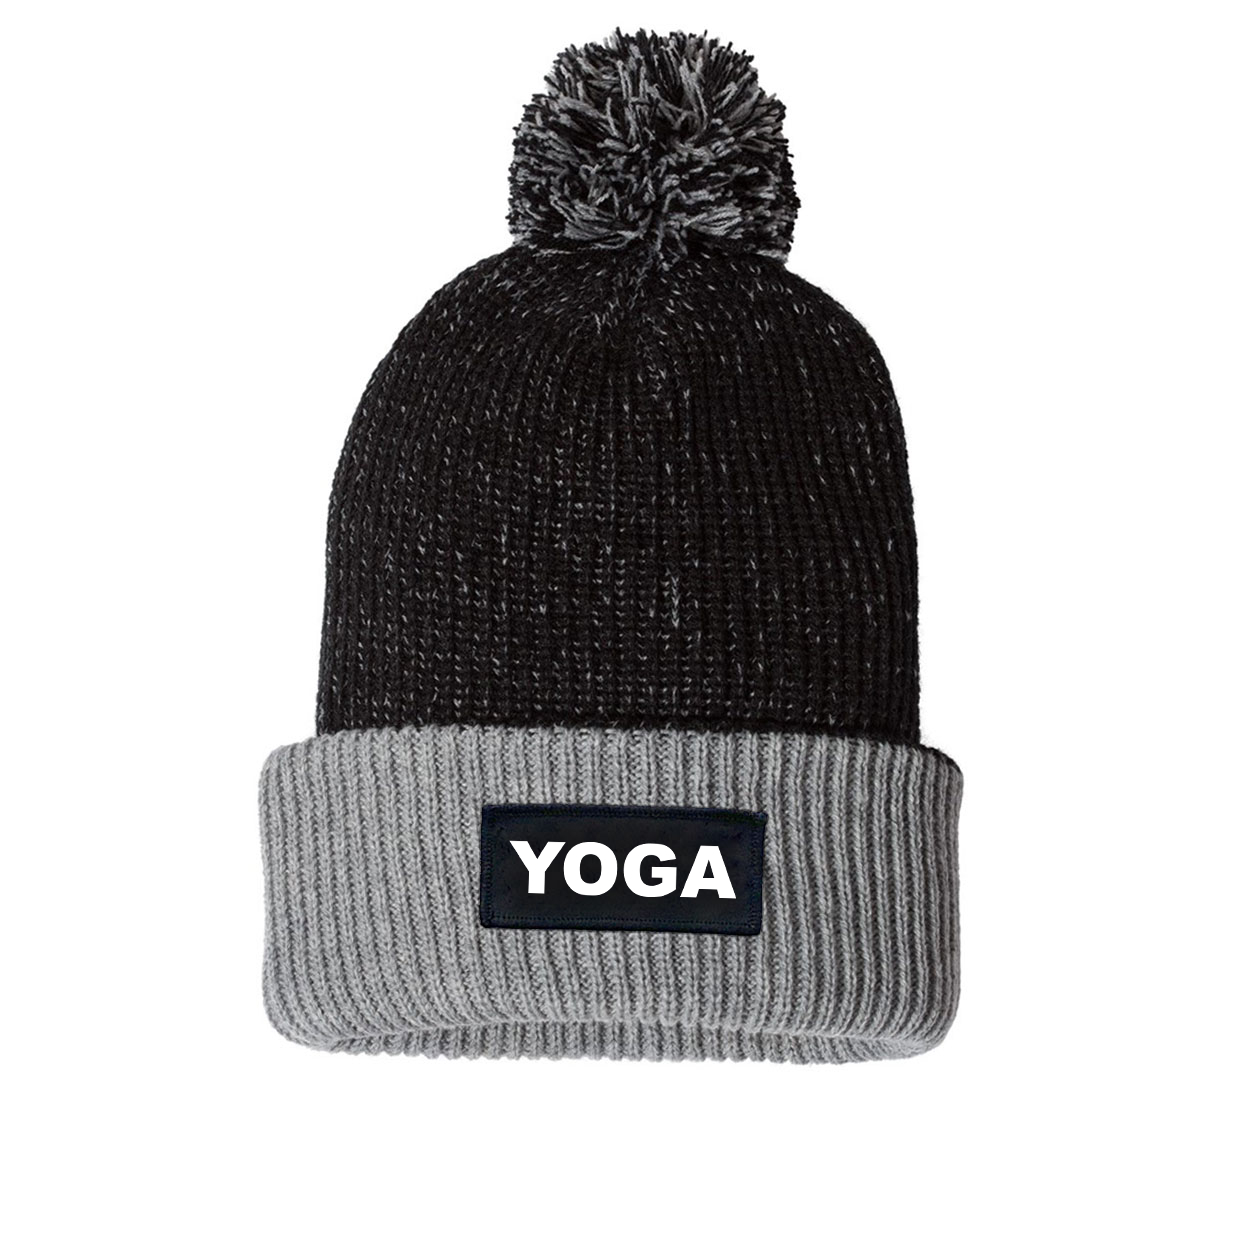 Yoga Brand Logo Night Out Woven Patch Roll Up Pom Knit Beanie Black/Gray (White Logo)